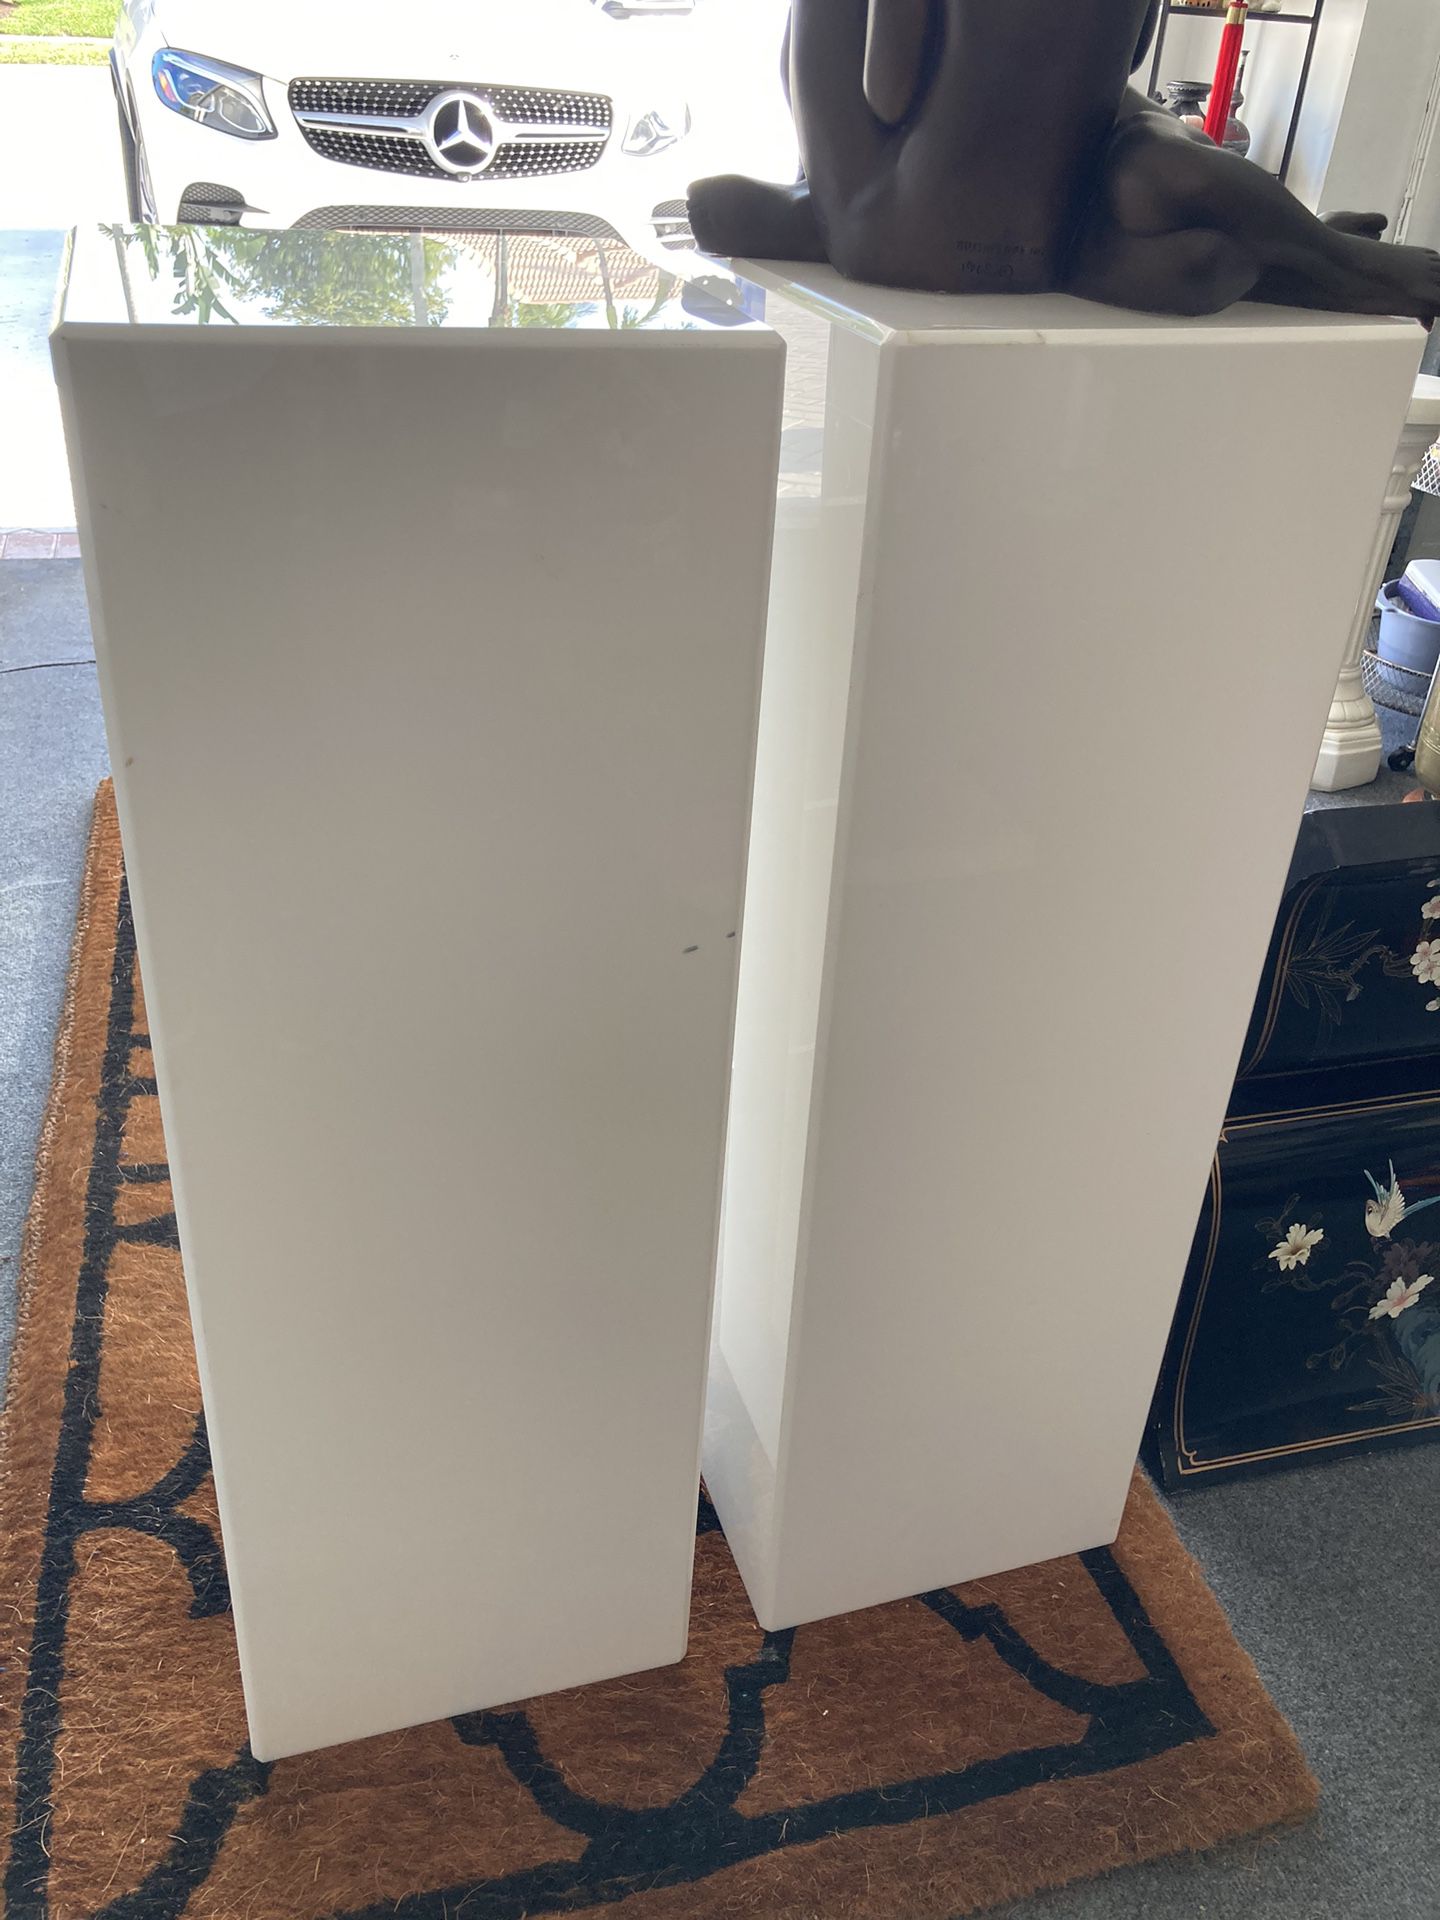 Great Vintage PAIR of Custom Made White Mid Century Modern MCM Cube Pedestal Tables, 36” Tall x 12” Square Top. The 2 Just $200 Firm.